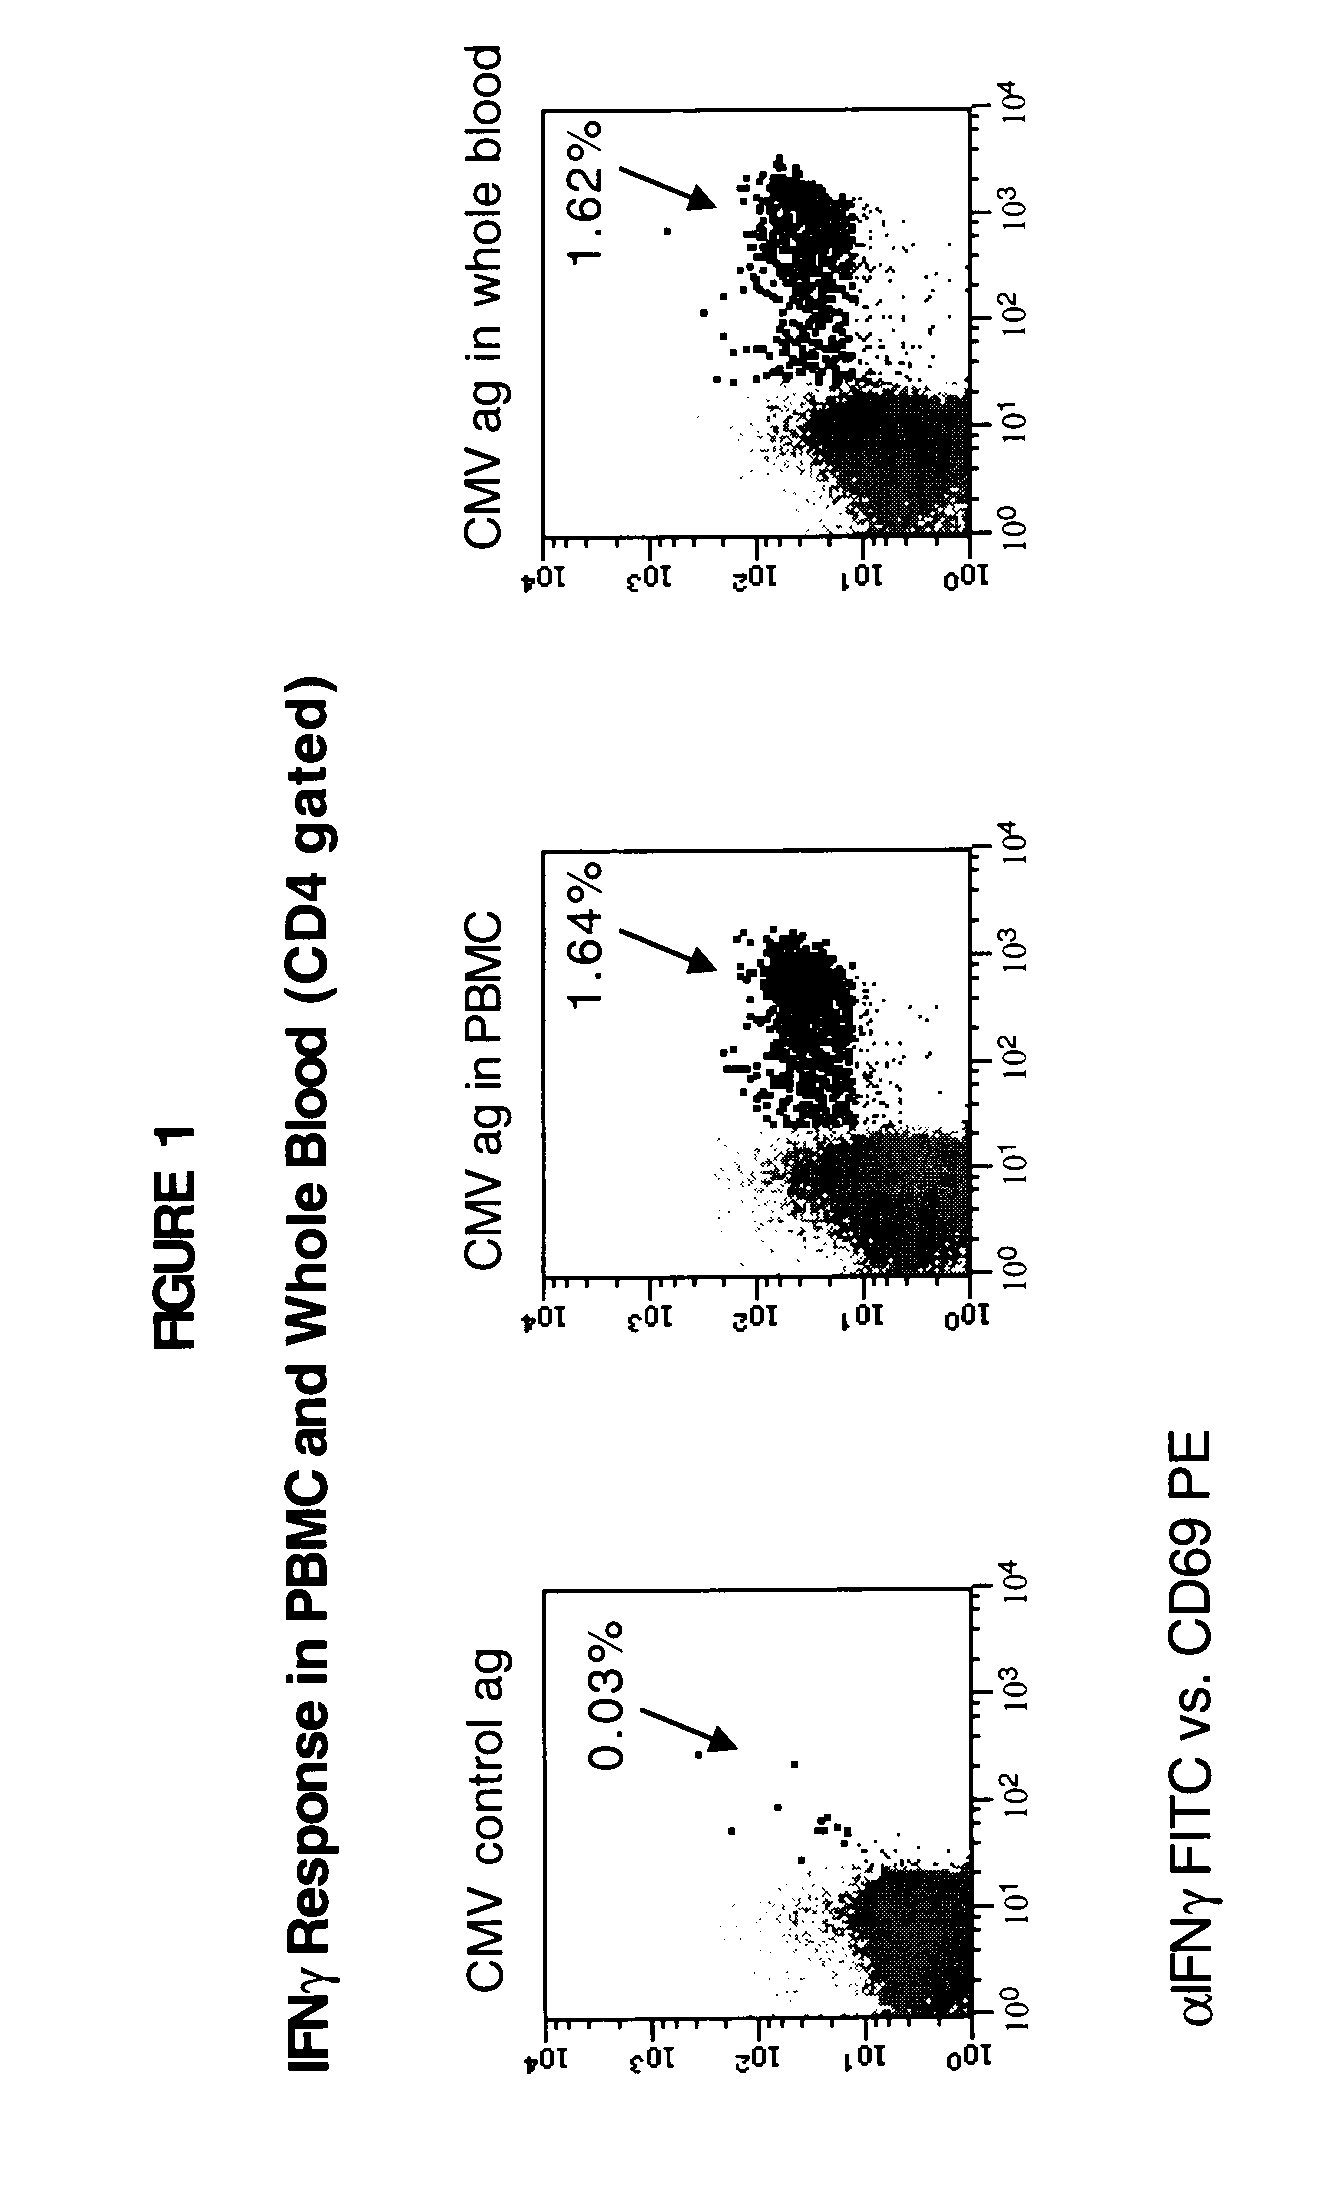 Method for detecting T cell response to specific antigens in whole blood